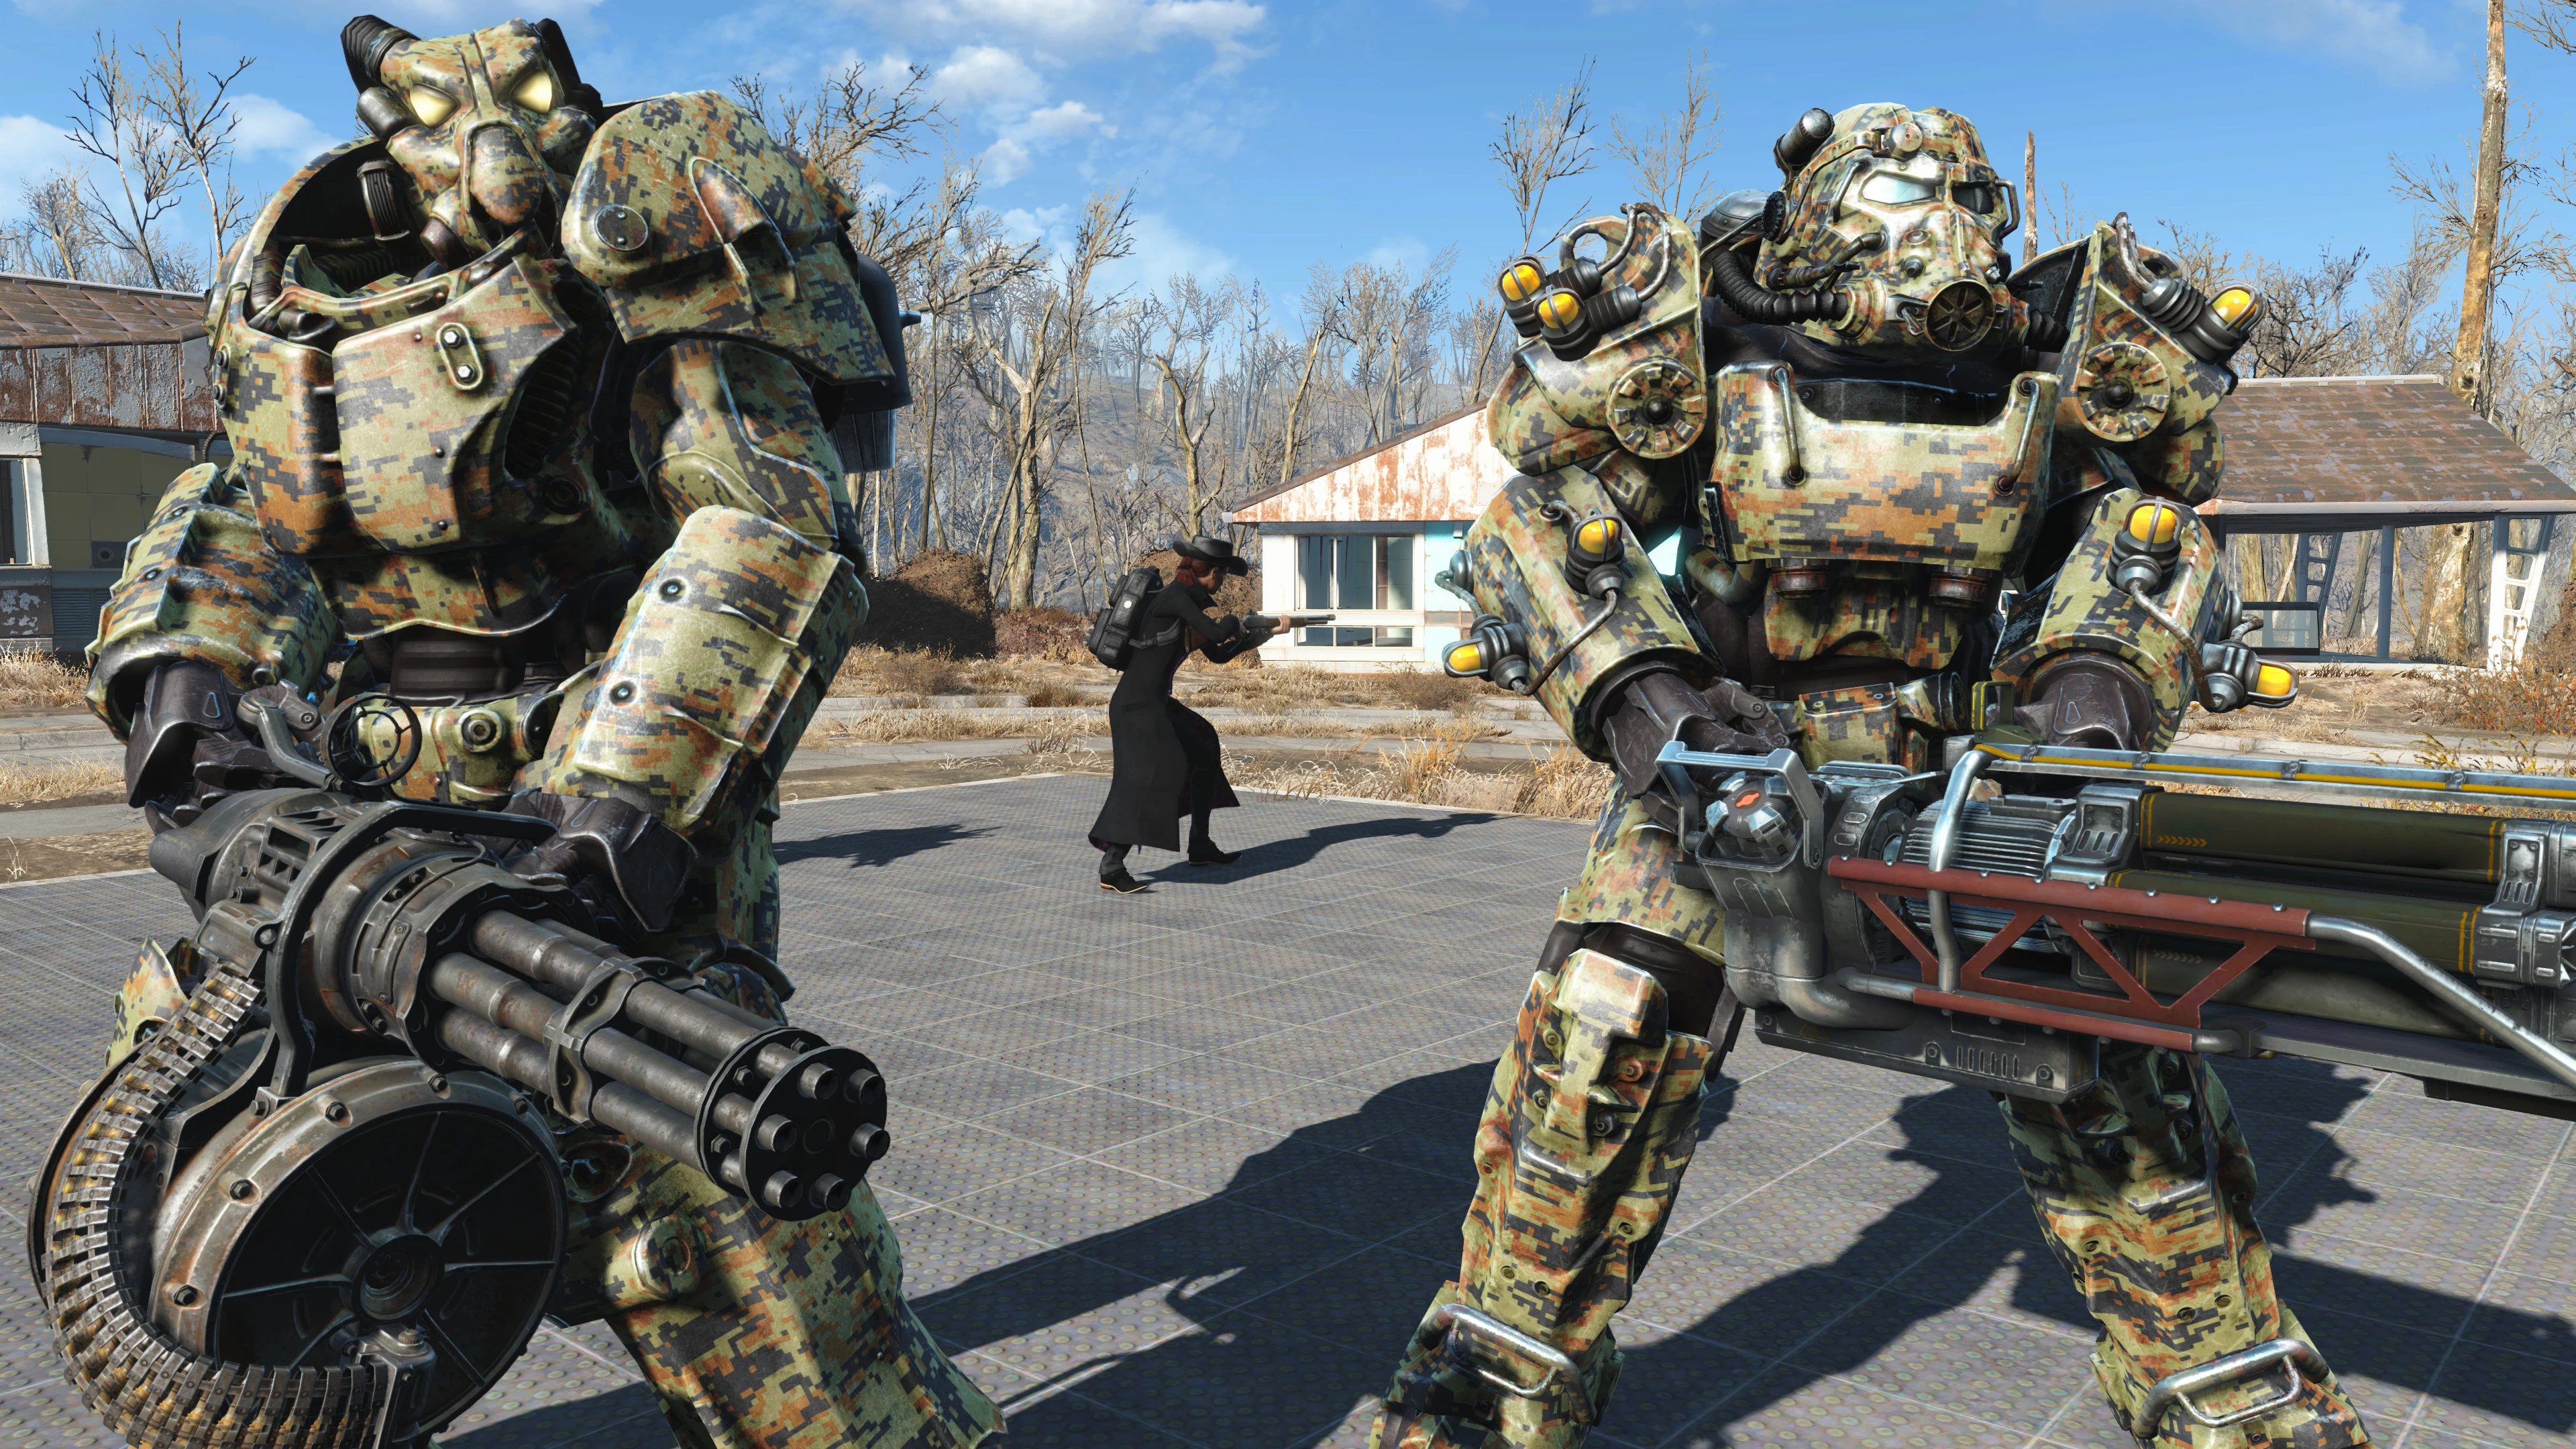 Capital wasteland robot pack fallout 4 фото 52